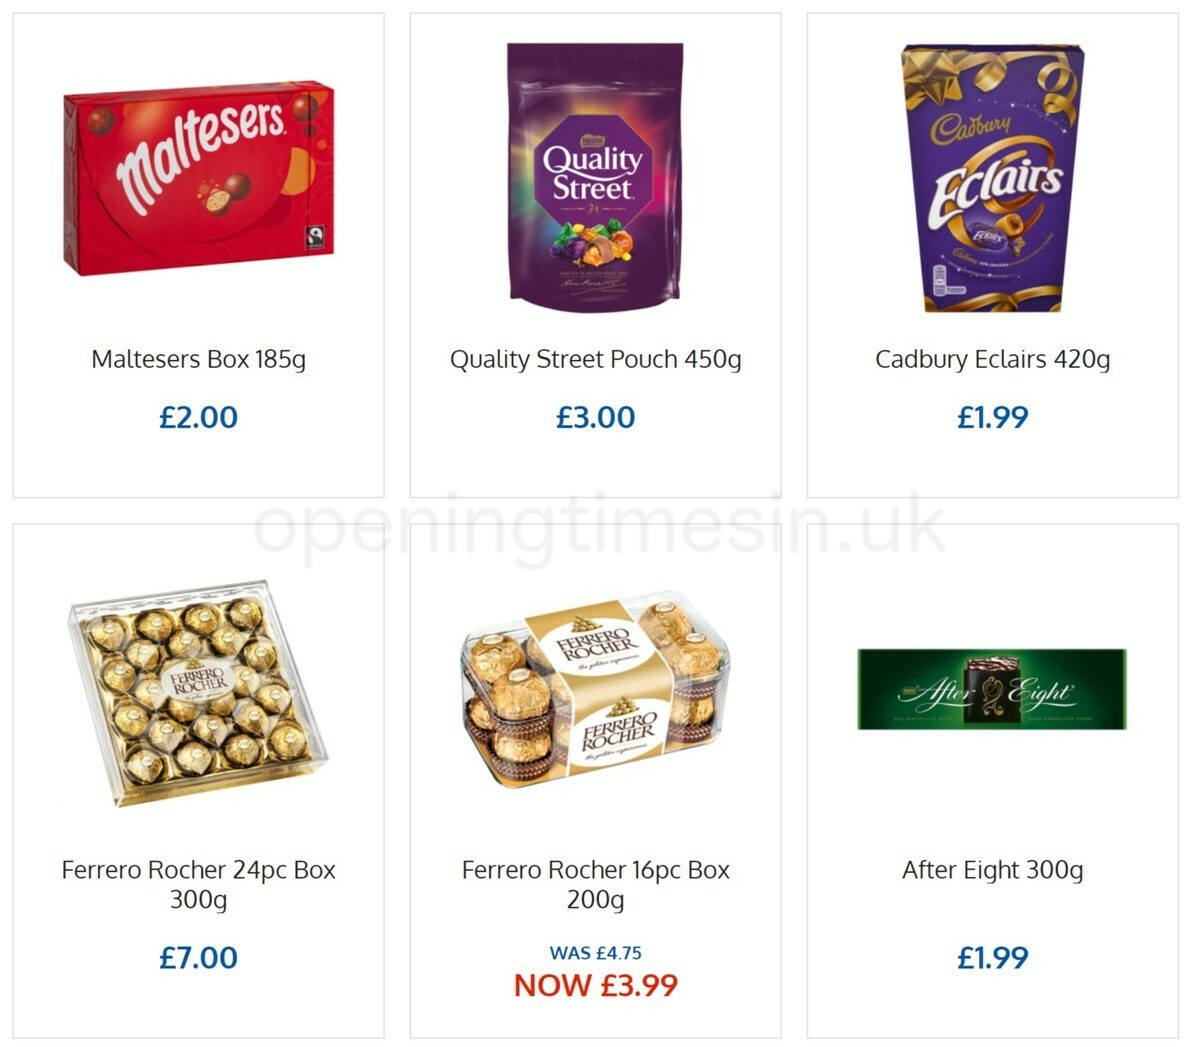 B&M Mother's Day Offers from 20 March